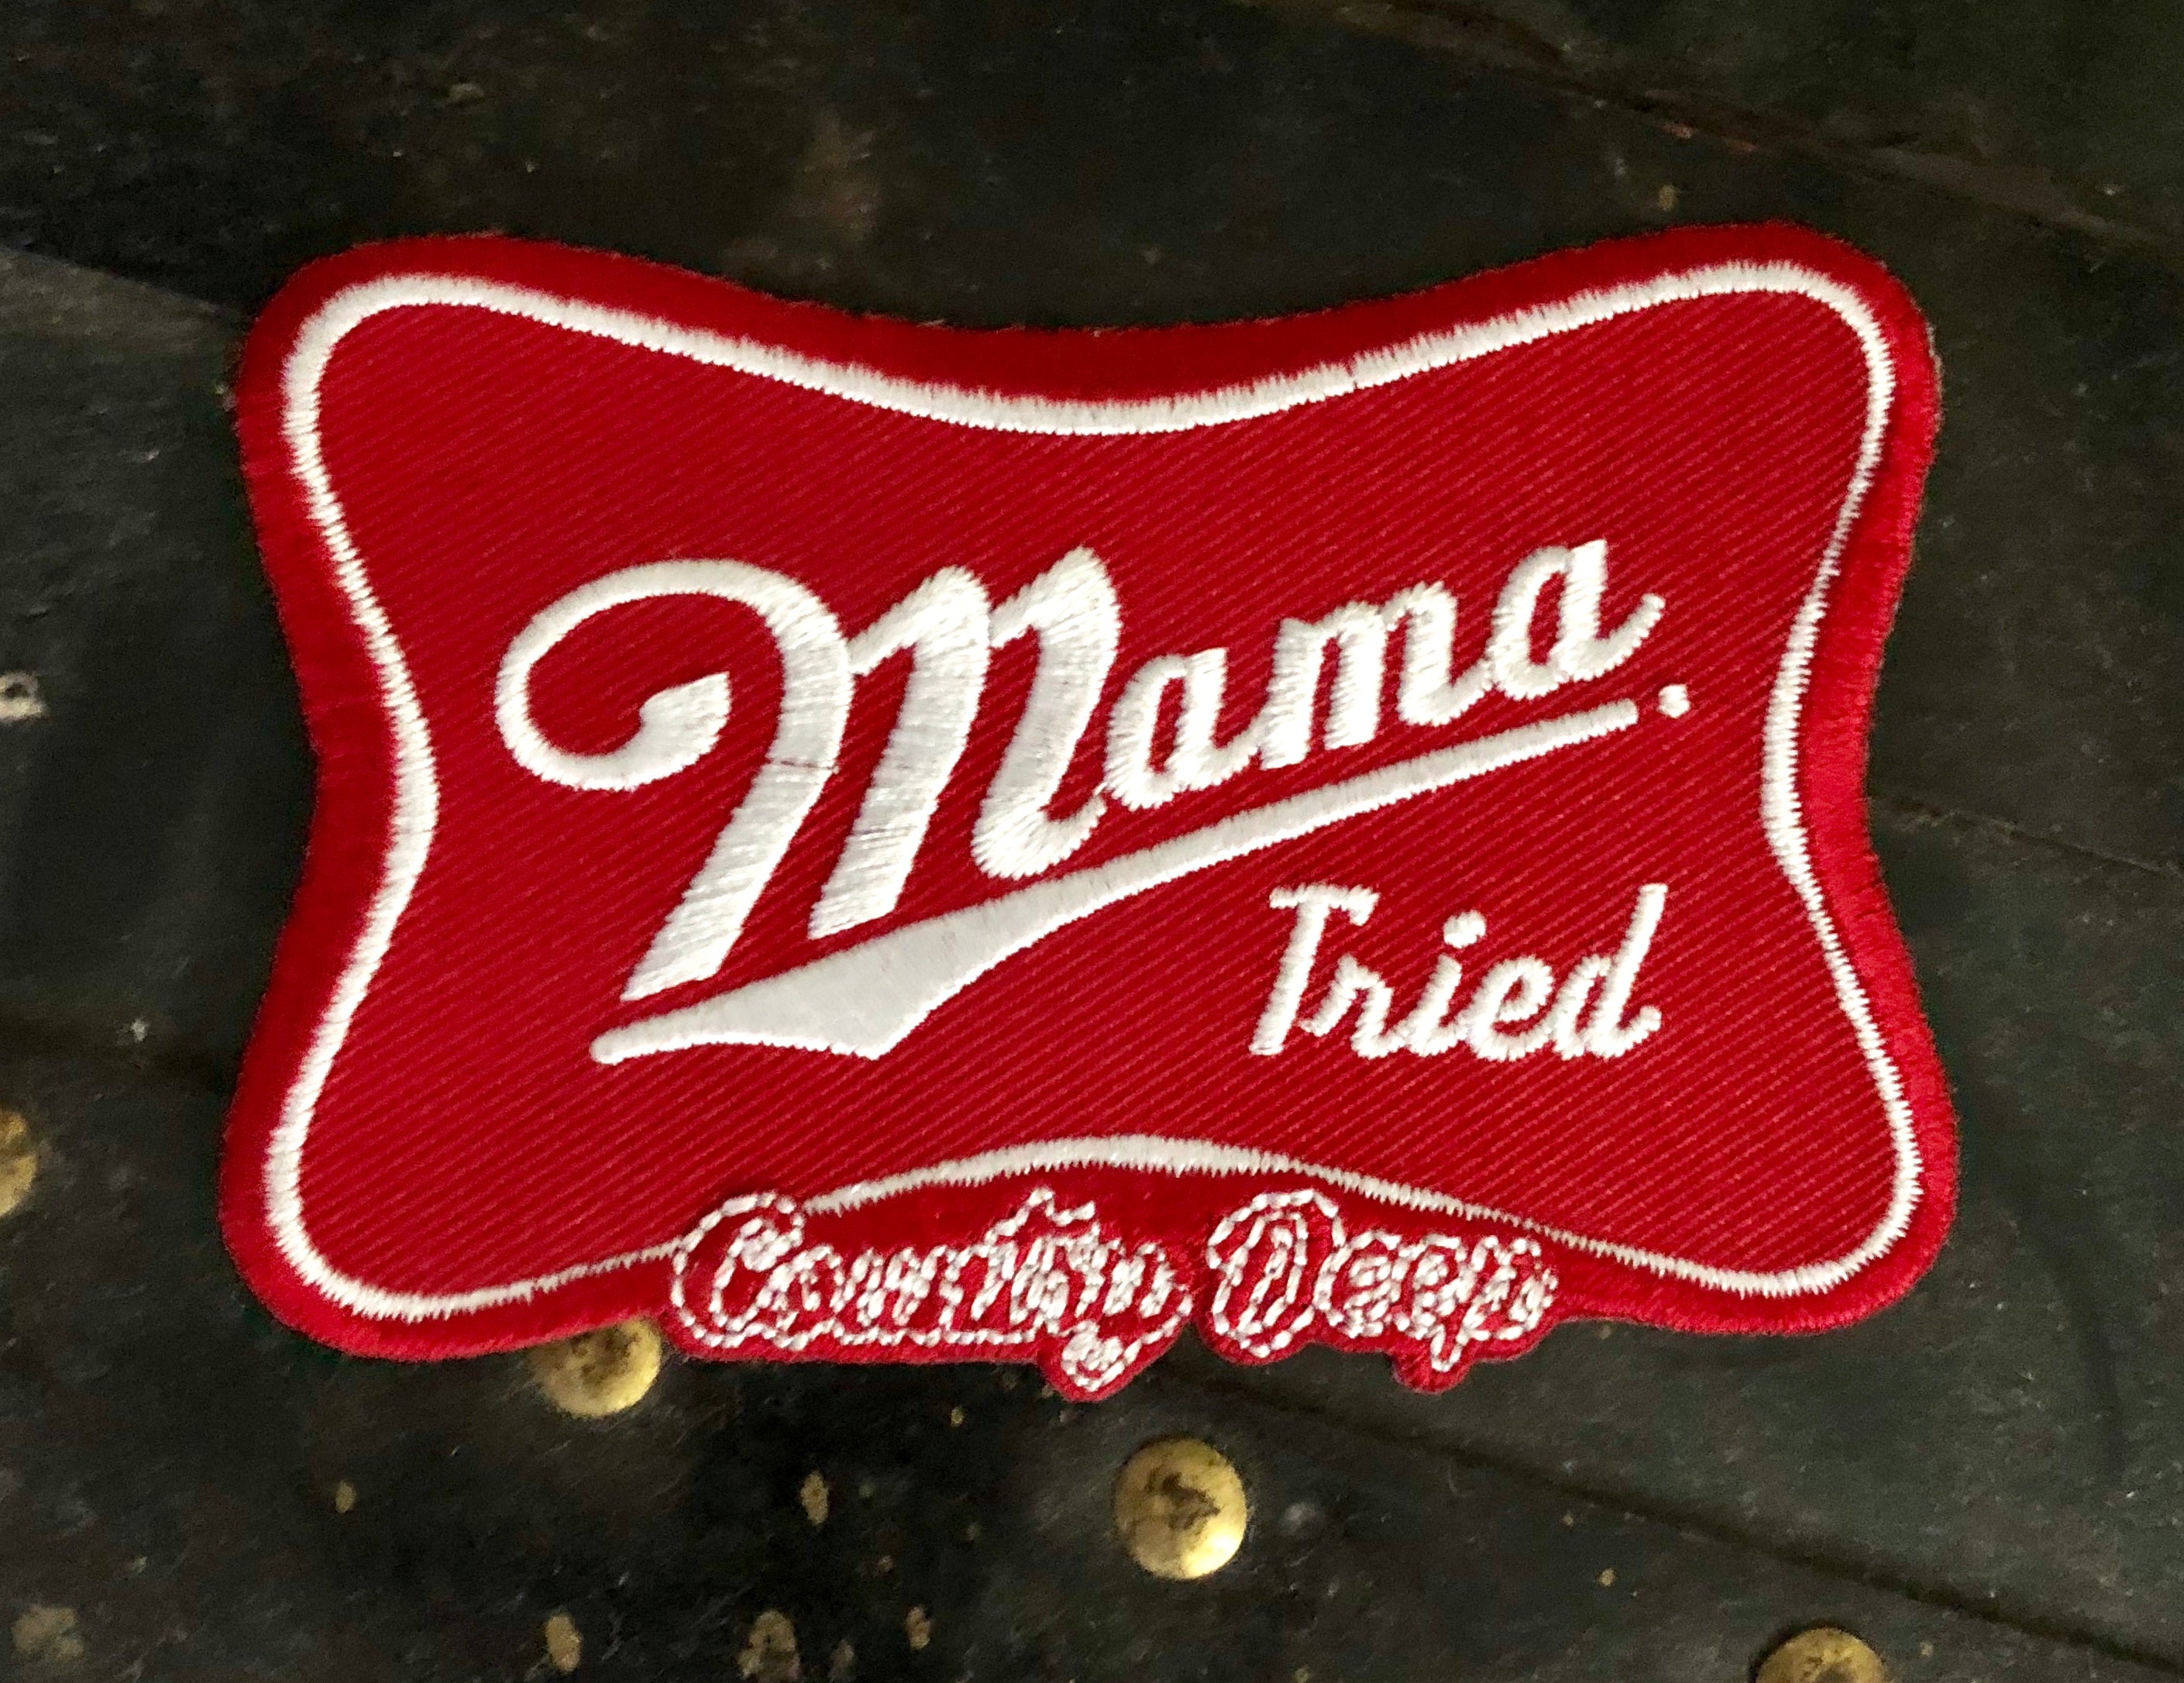 Hat patch hat draft-STANDARD: Mama Tried